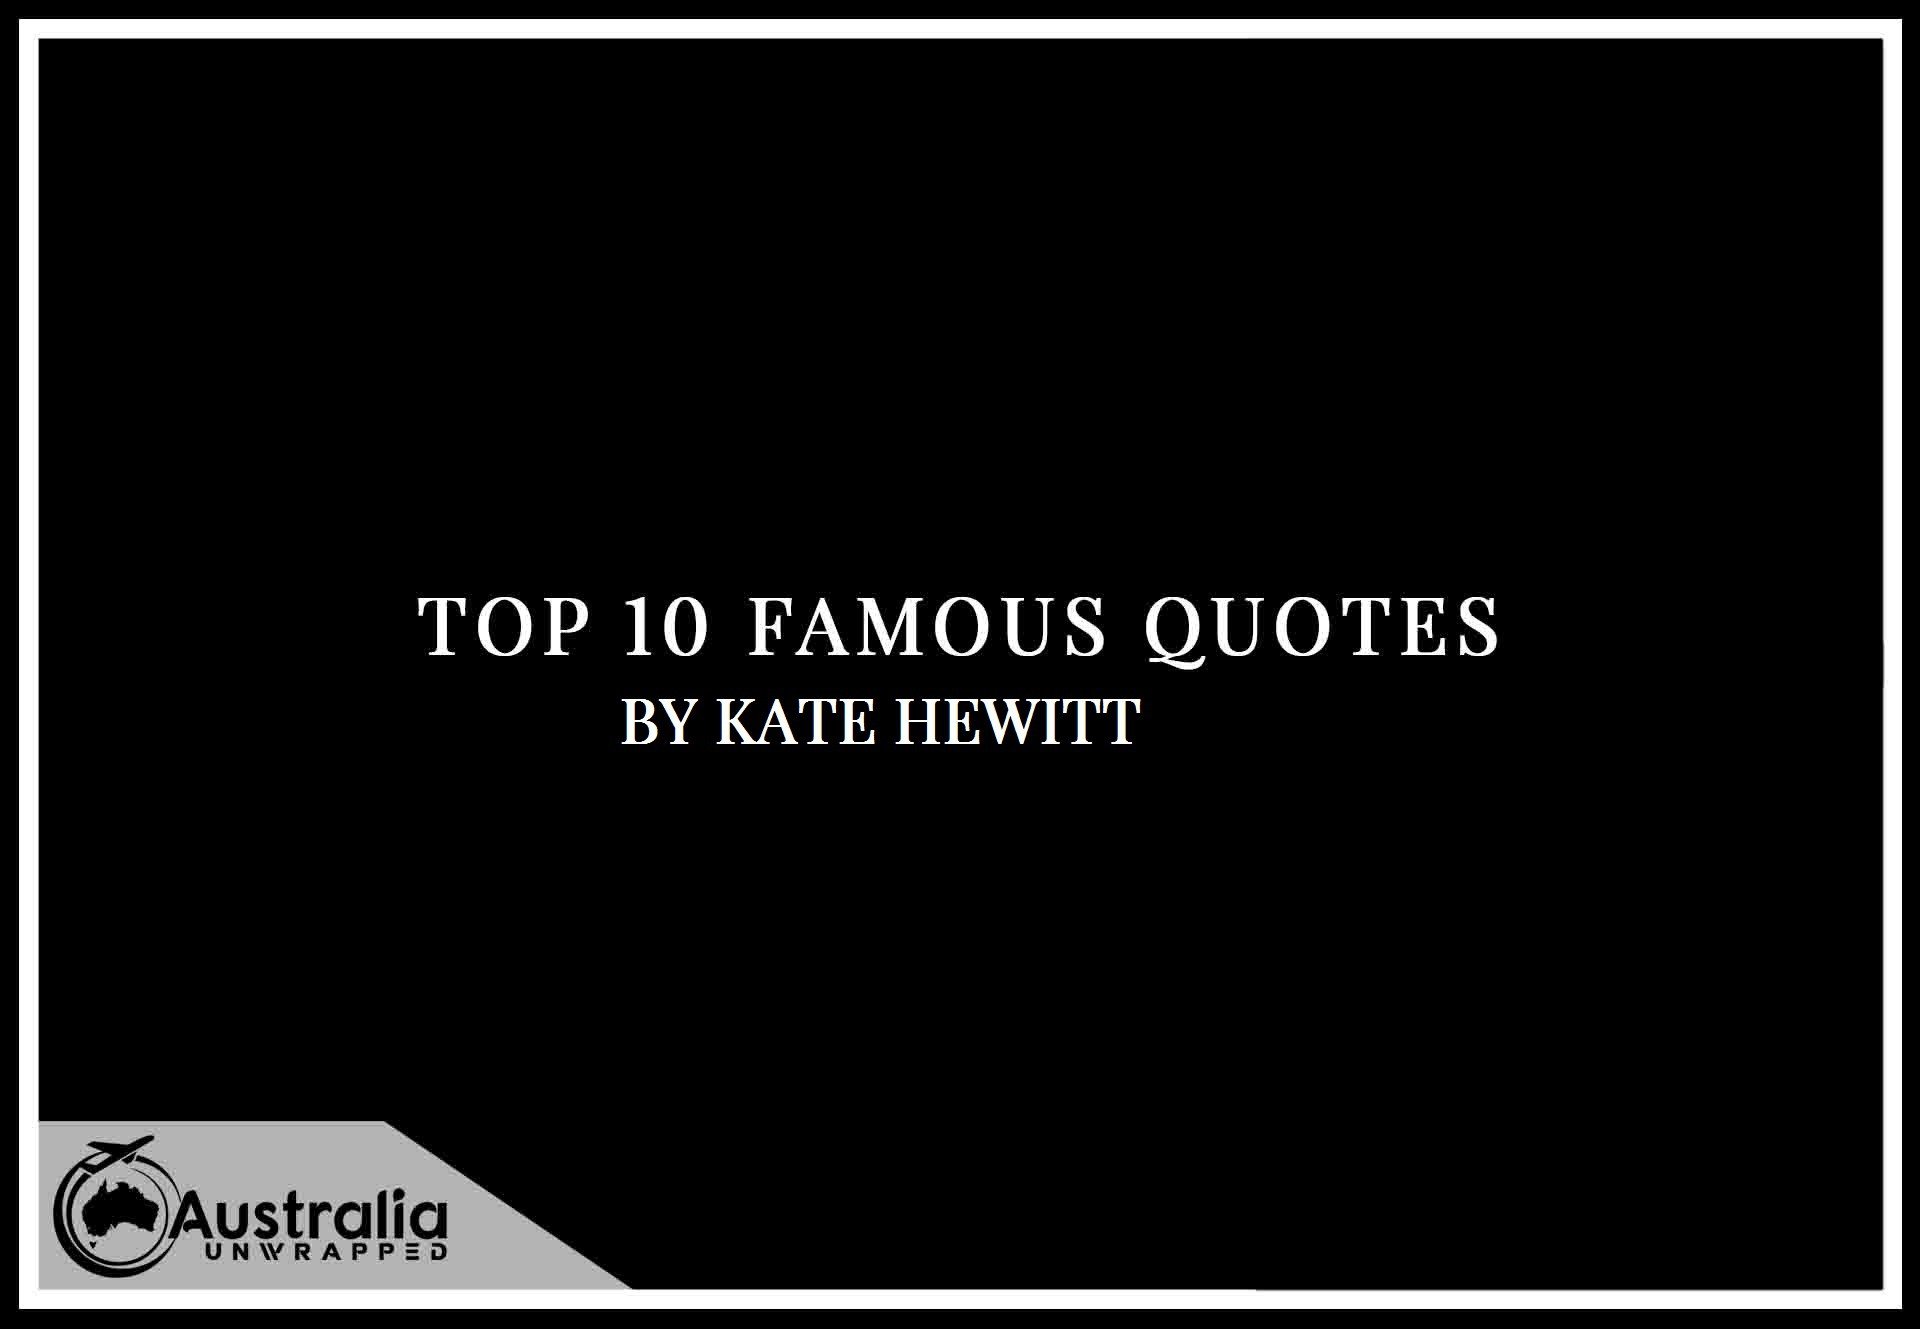 Kate Hewitt’s Top 10 Popular and Famous Quotes